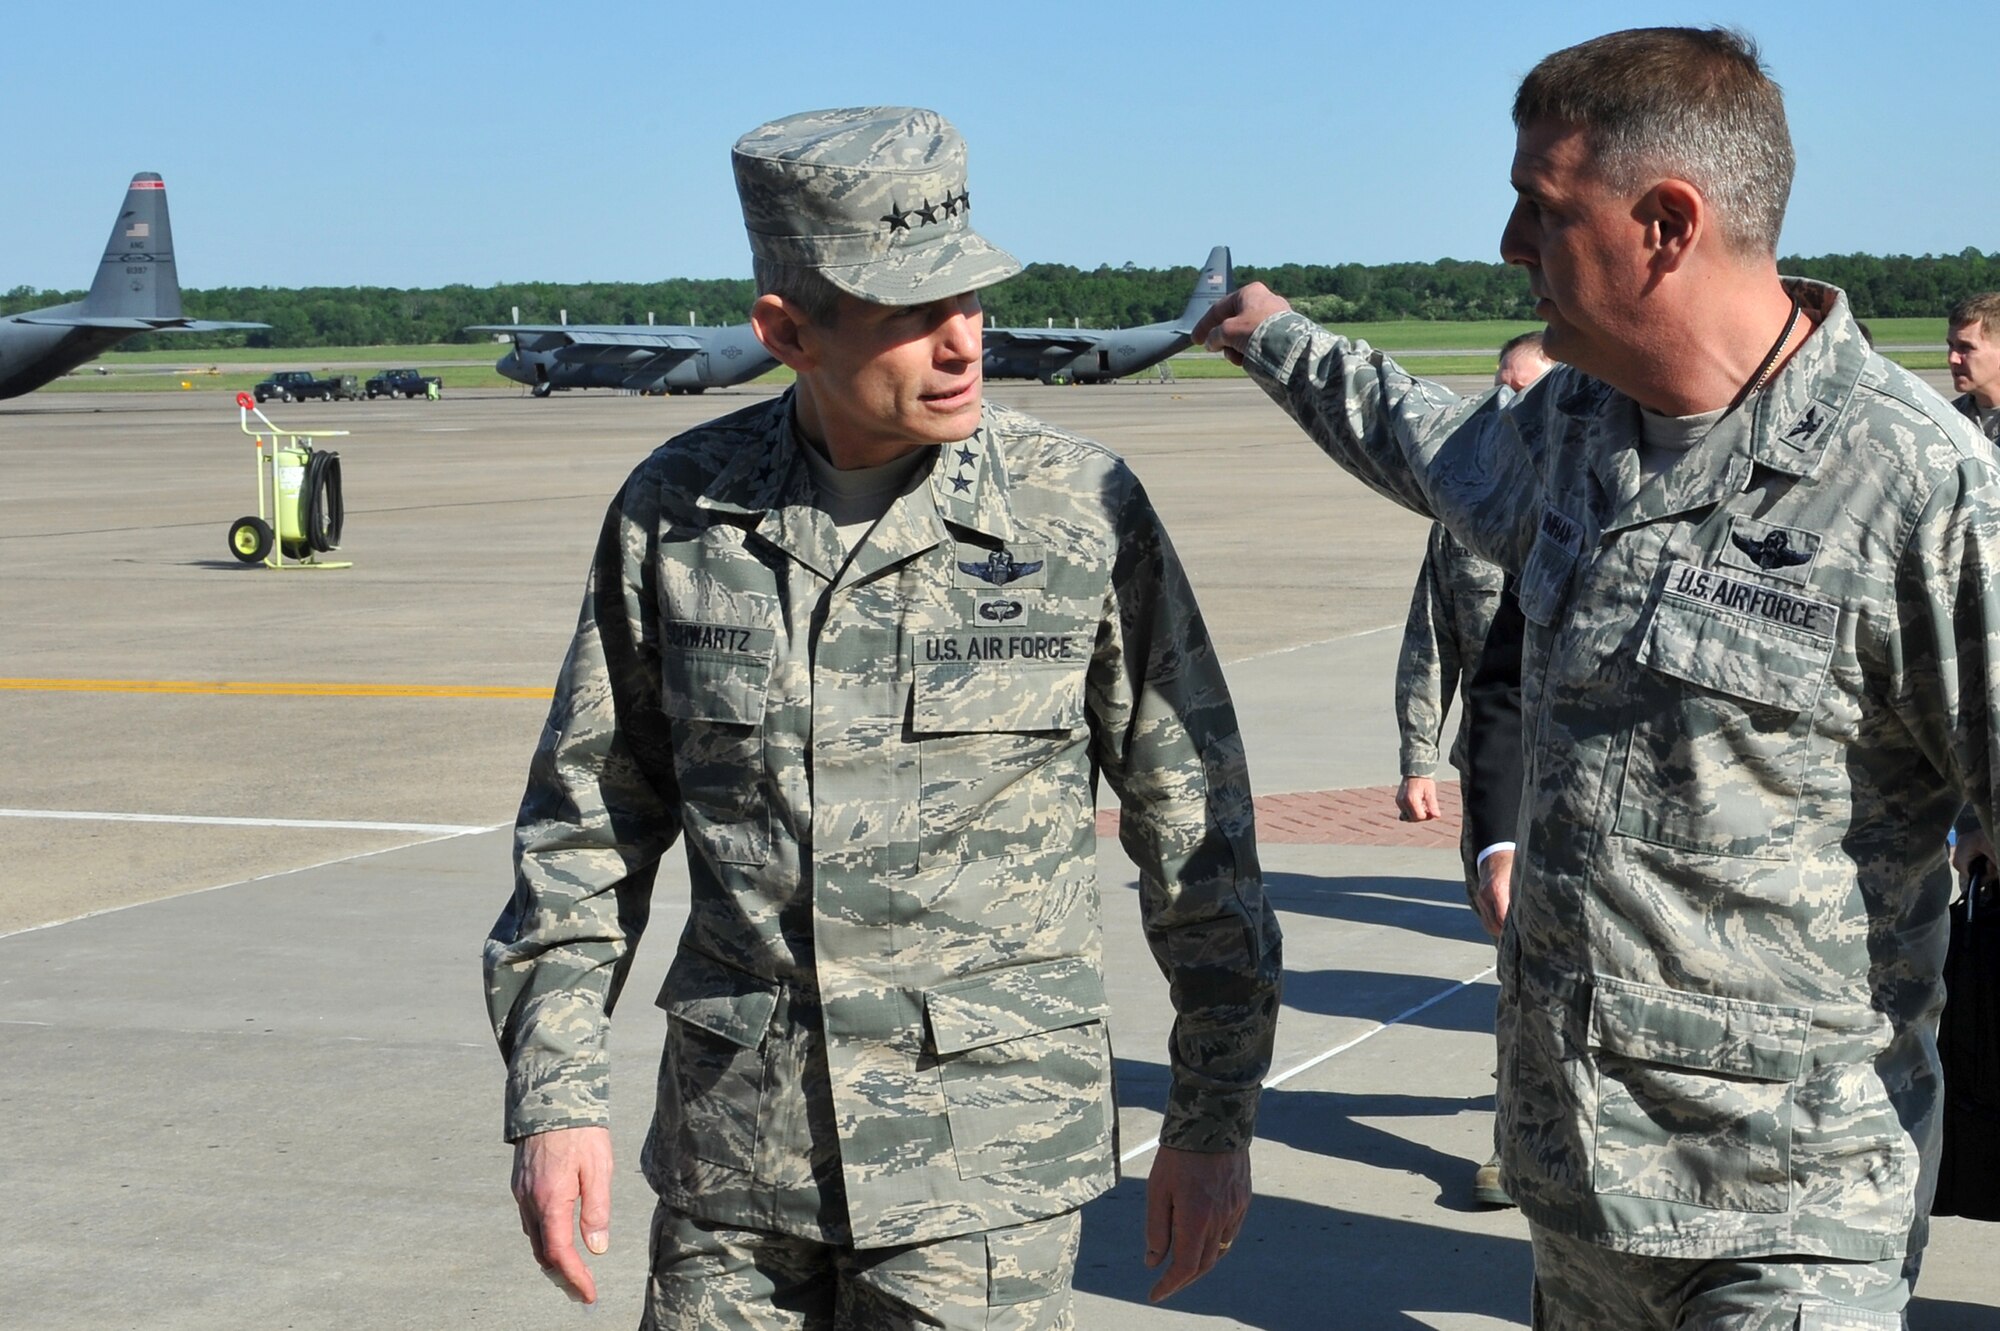 Air Force Chief of Staff Gen. Norton Schwartz talks with Col. Michael Minihan, 19th Airlift Wing commander, May 4, 2011, at Little Rock Air Force Base, Ark., during a base visit. General Schwartz was previously assigned to Little Rock AFB during his C-130 Hercules initial qualification training and as a C-130E/H flight examiner. (U.S. Air Force photo/Staff Sgt. Chris Willis)